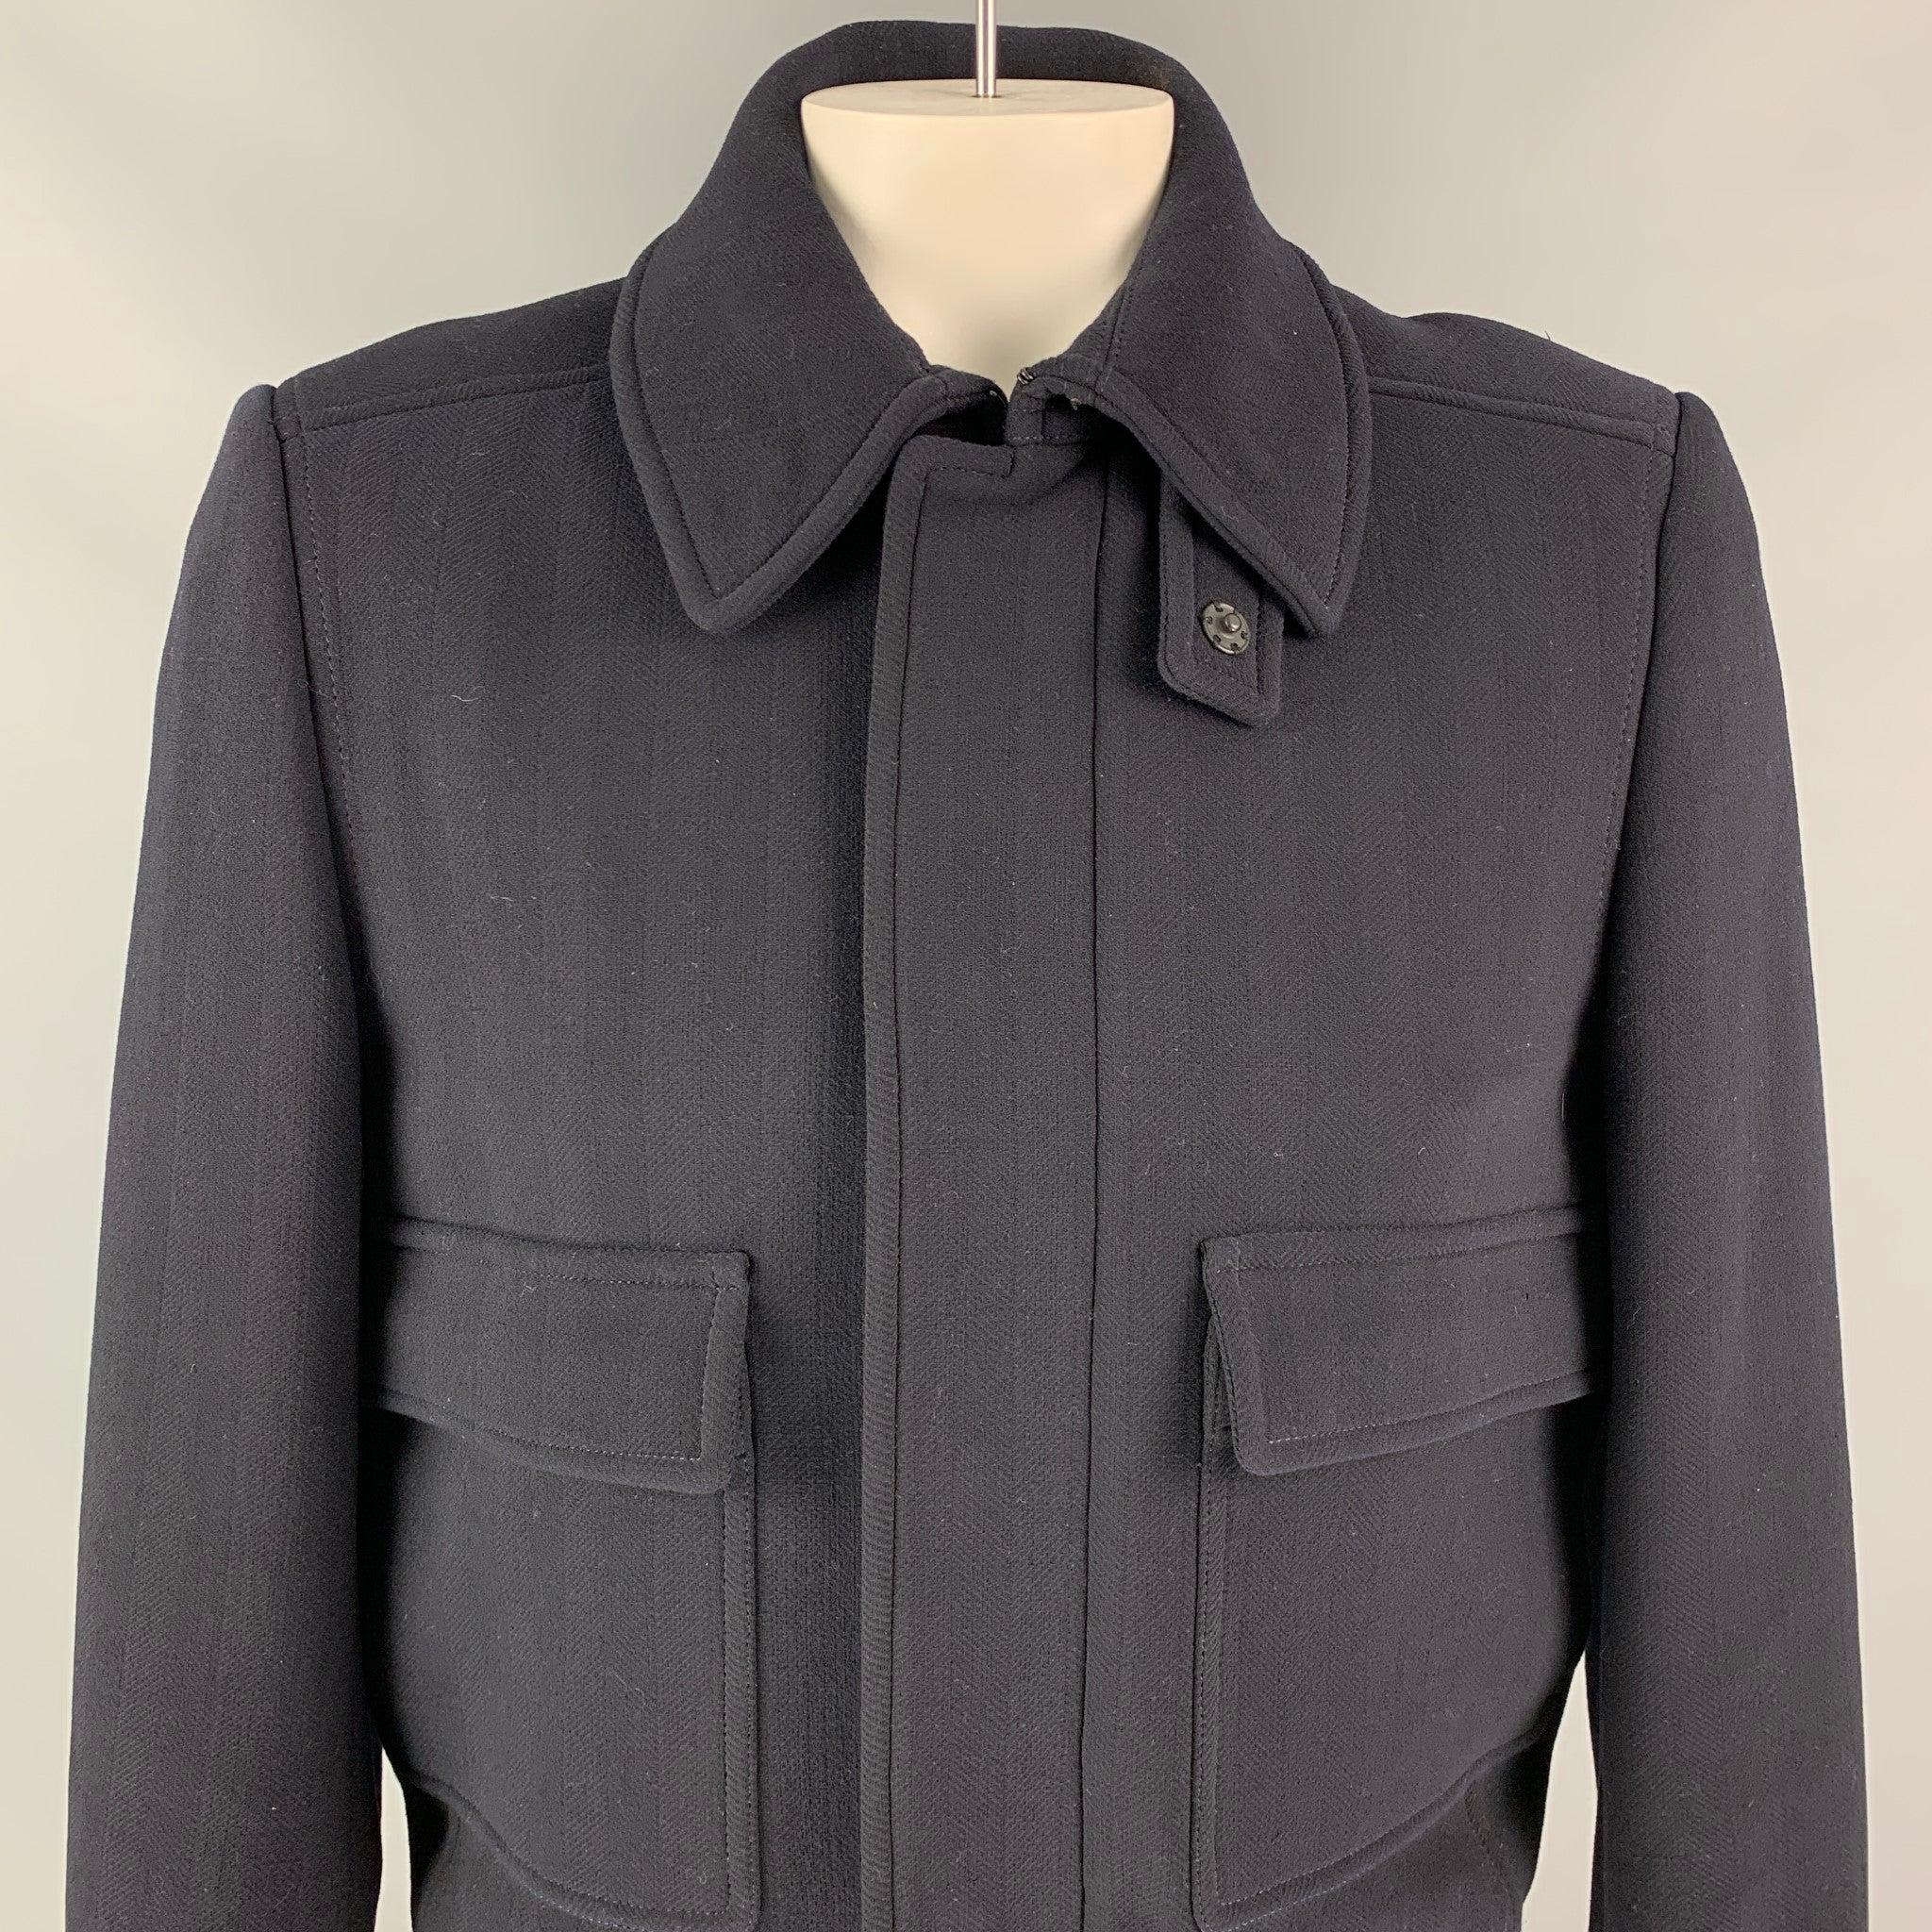 BURBERRY PRORSUM by Christopher Bailey coat comes in a navy virgin wool with a full liner featuring a ribbed hem, spread collar, patch pockets, and a zip & snap button closure. Made in Italy.Very Good
Pre-Owned Condition. 

Marked:  IT 52